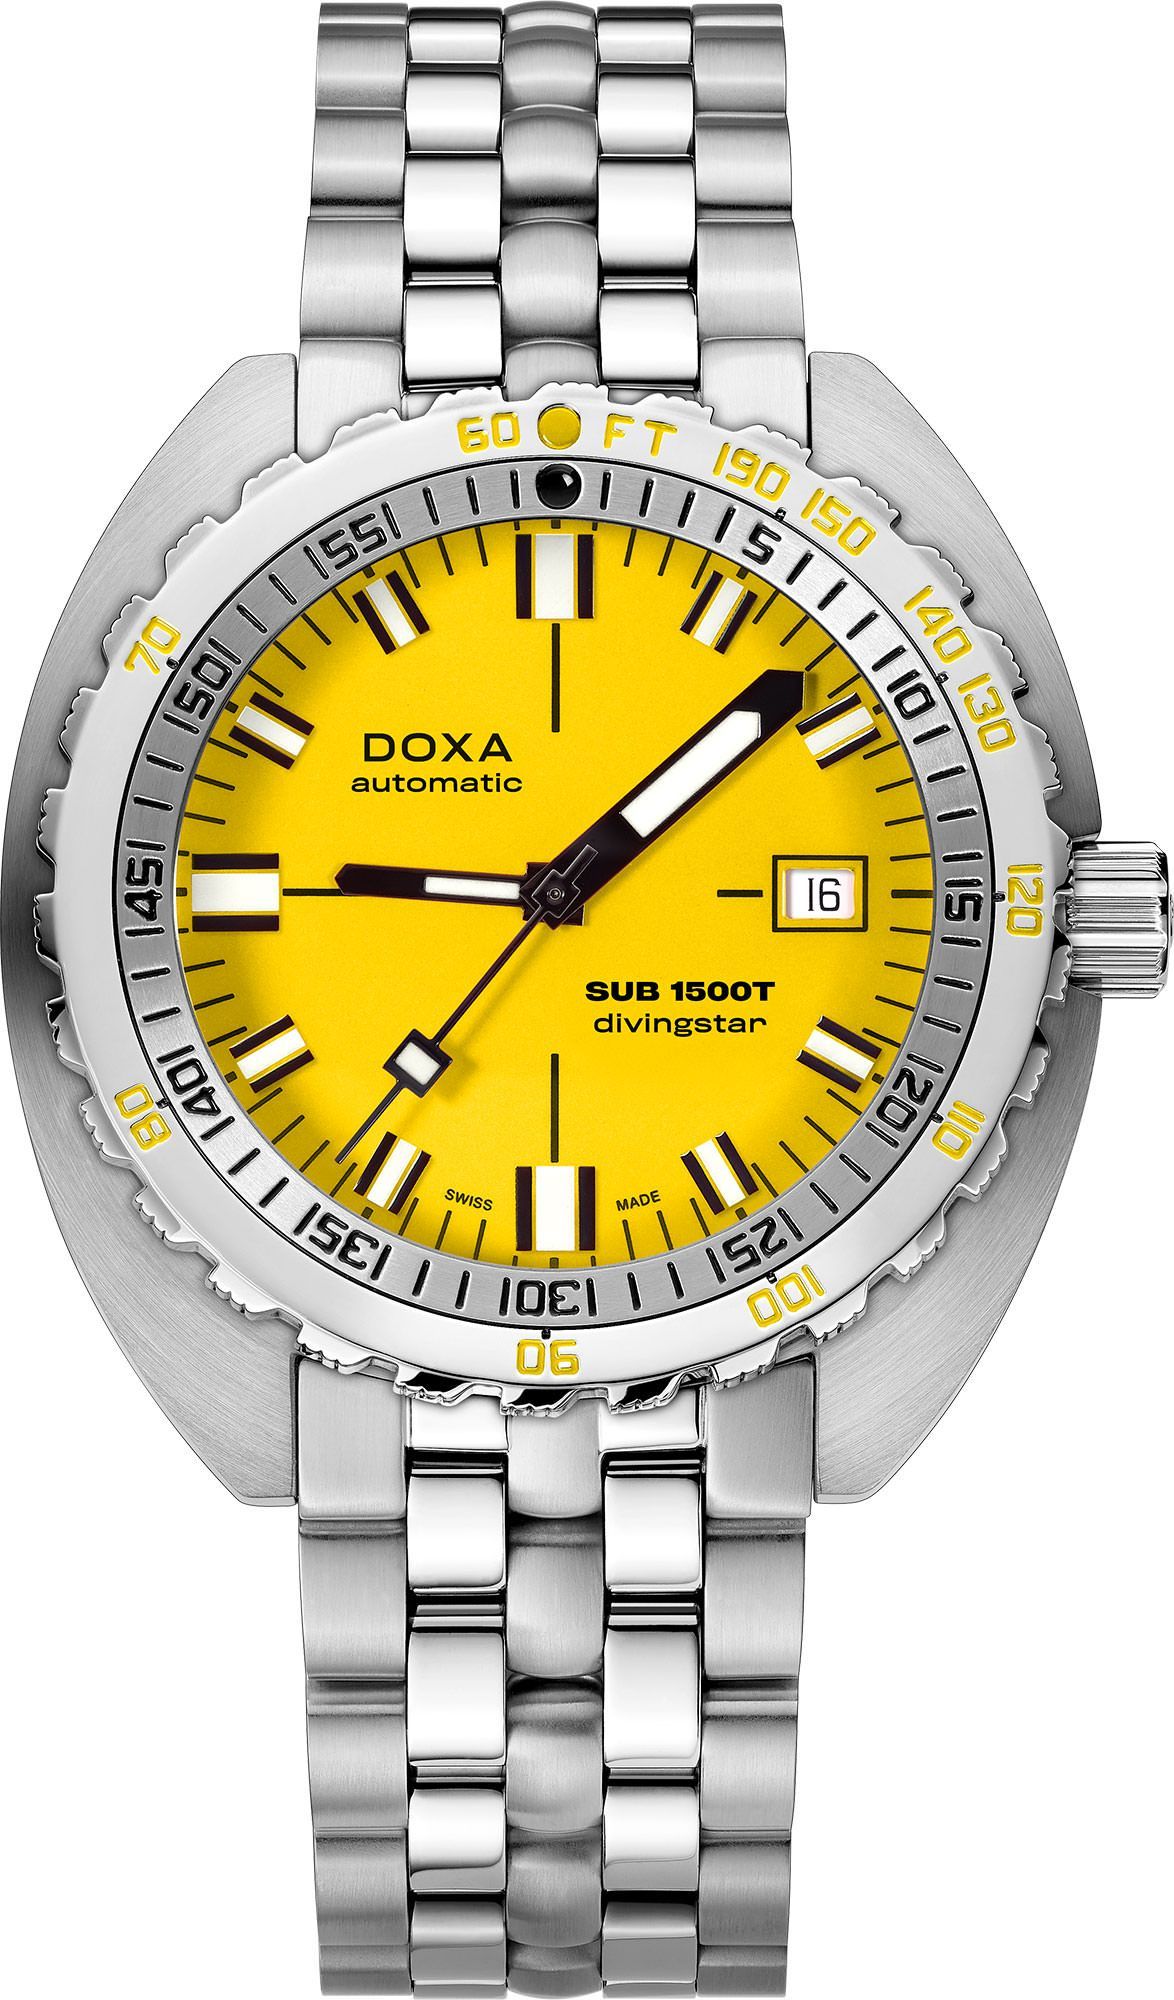 Doxa SUB 1500T Divingstar Yellow Dial 45 mm Automatic Watch For Men - 1